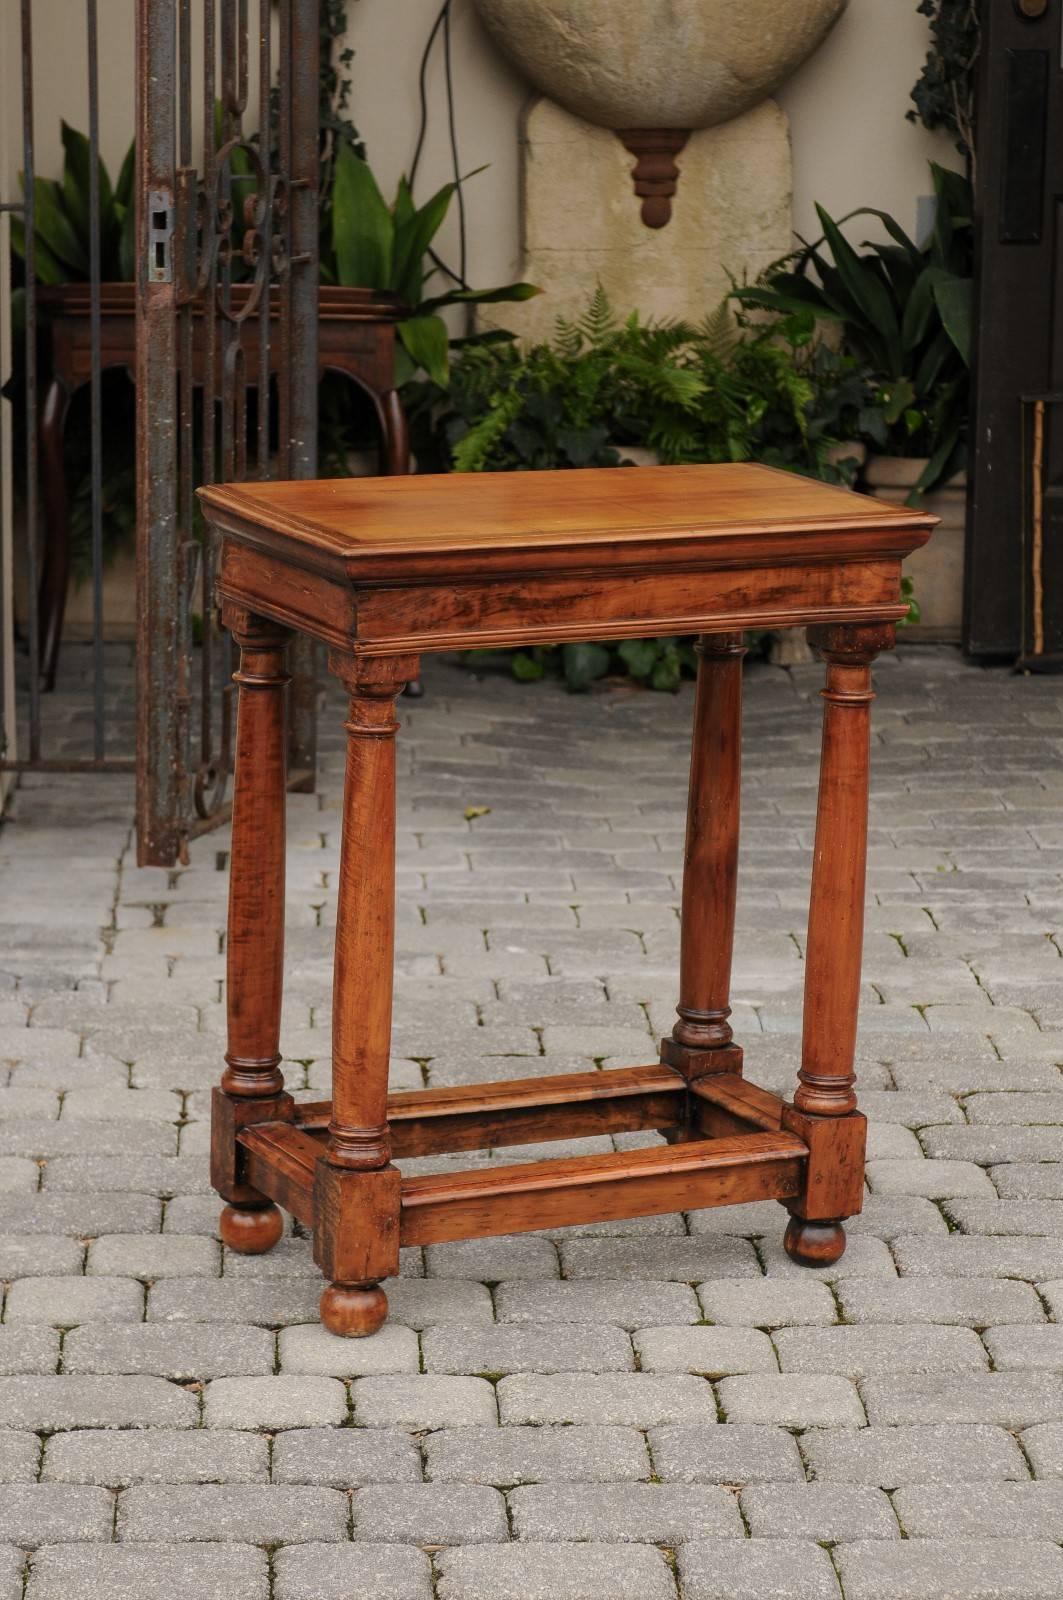 This exquisite French Empire style fruitwood side table from the Mid-Century features a rectangular top supported by four Doric style wooden columns, with a characteristic entasis bulge, a slight convex shape. The legs are connected to each other by